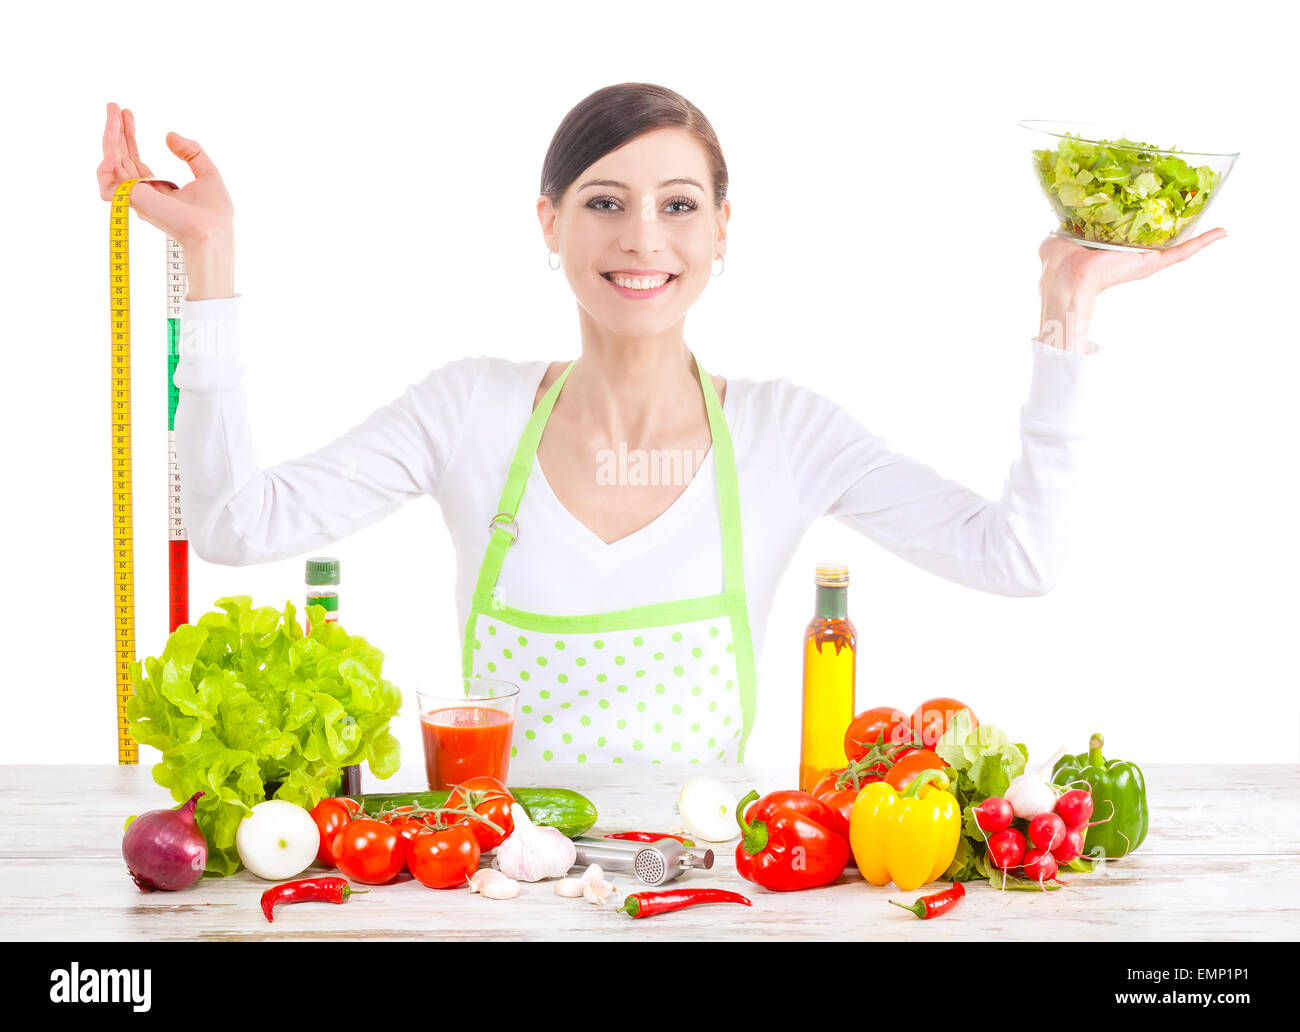 Young happy woman with salad and measuring tape, healthy food and diet concept. Stock Photo